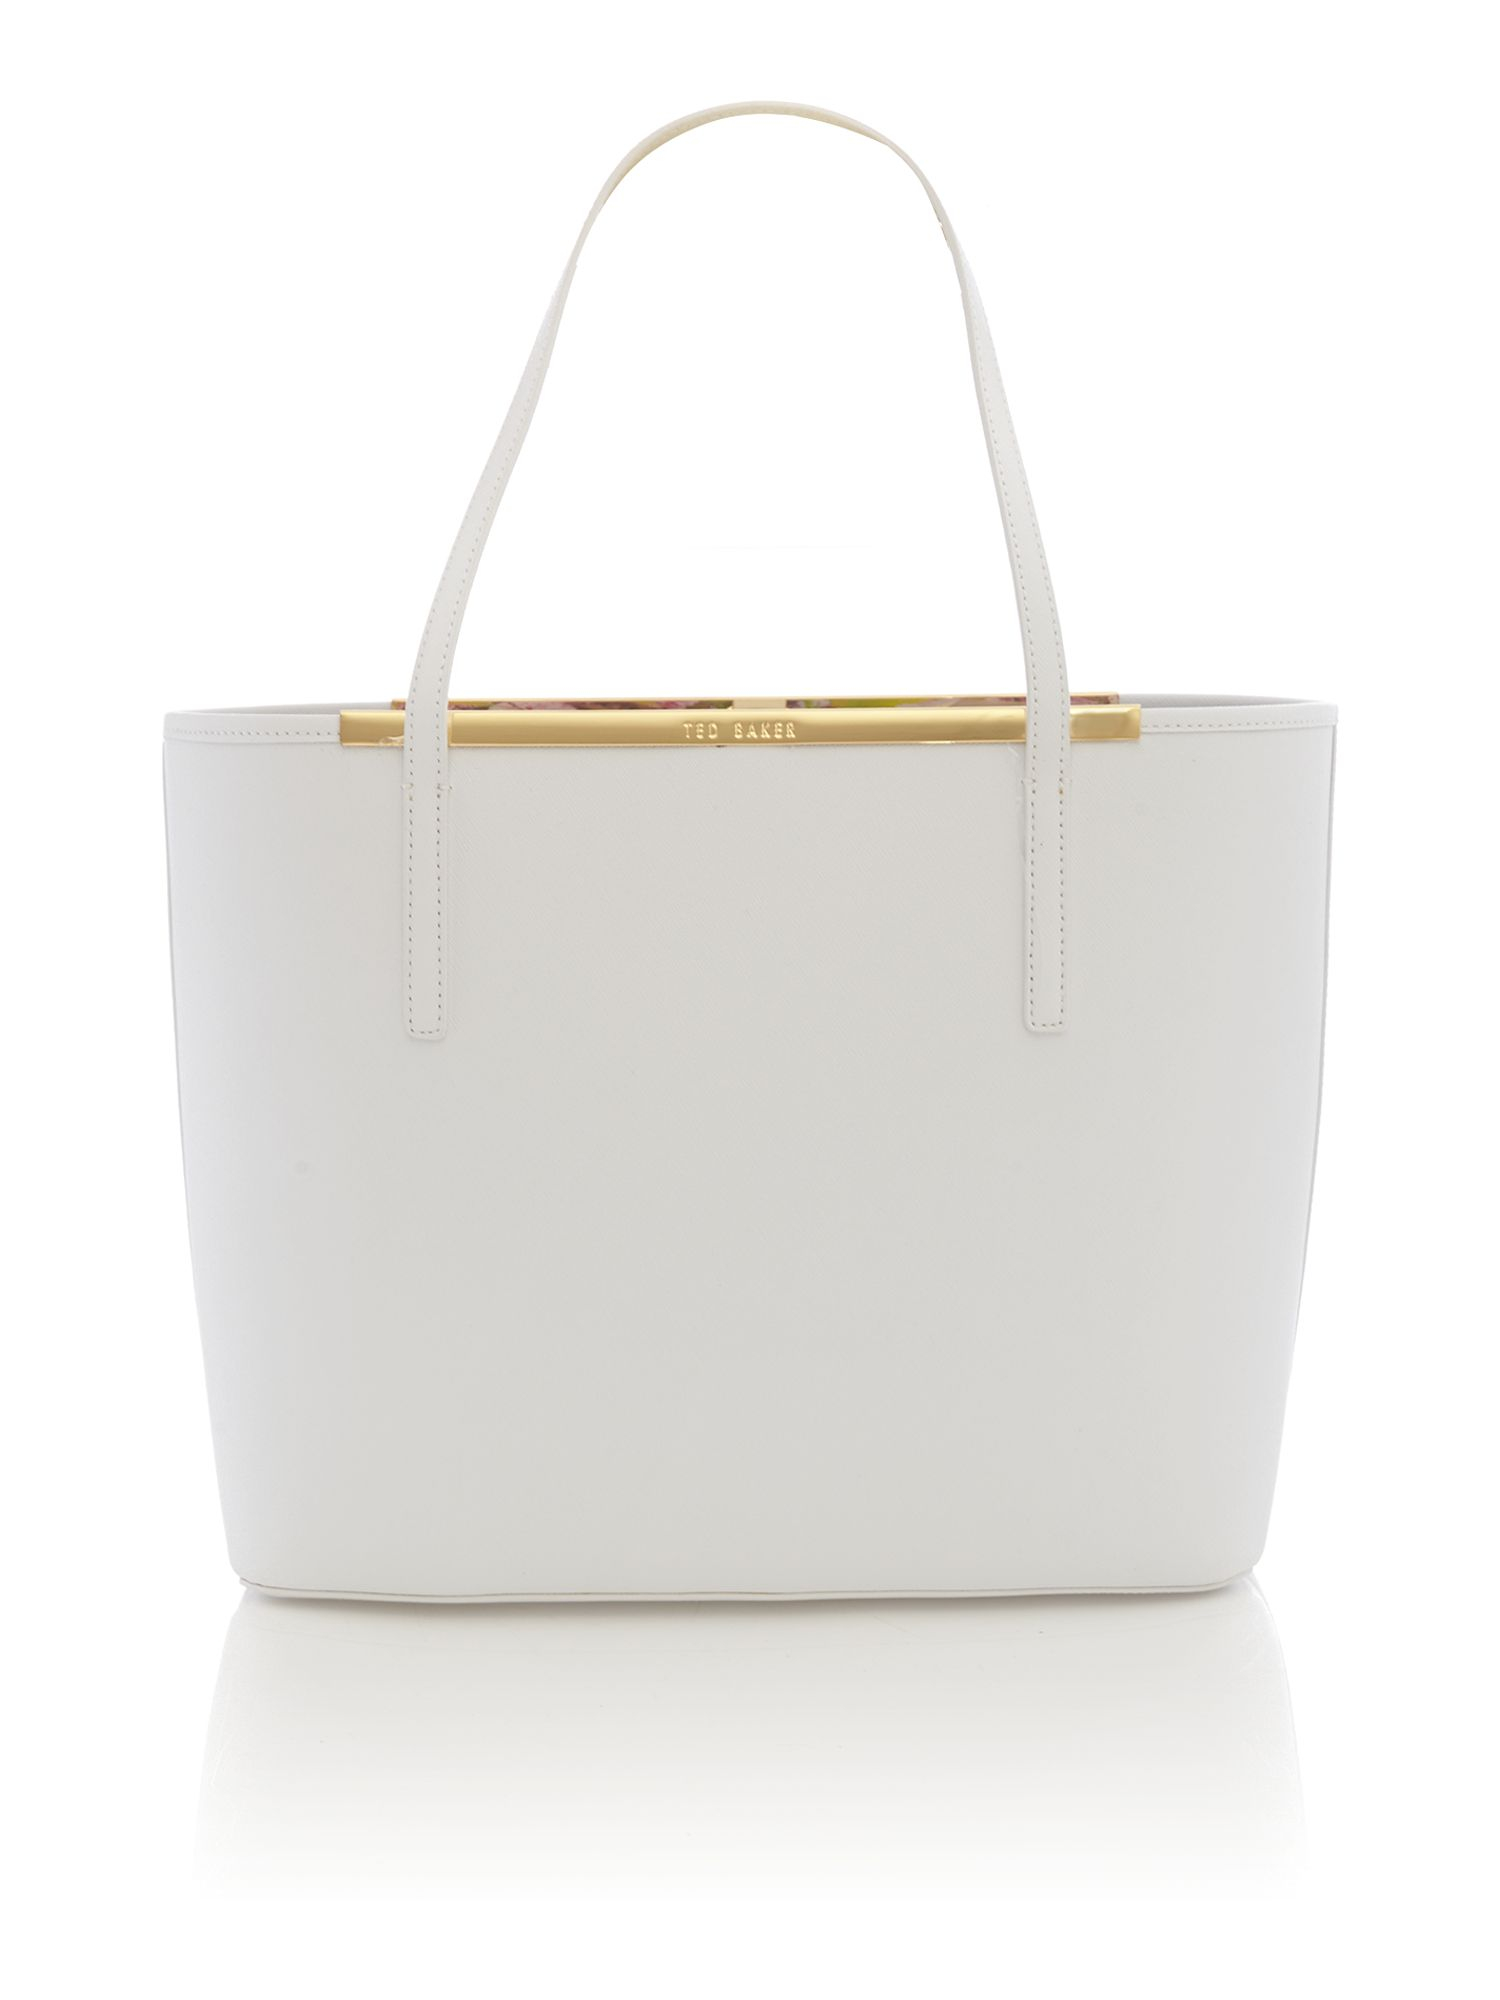 Ted baker White Large Printed Lining Leather Tote Bag in White | Lyst